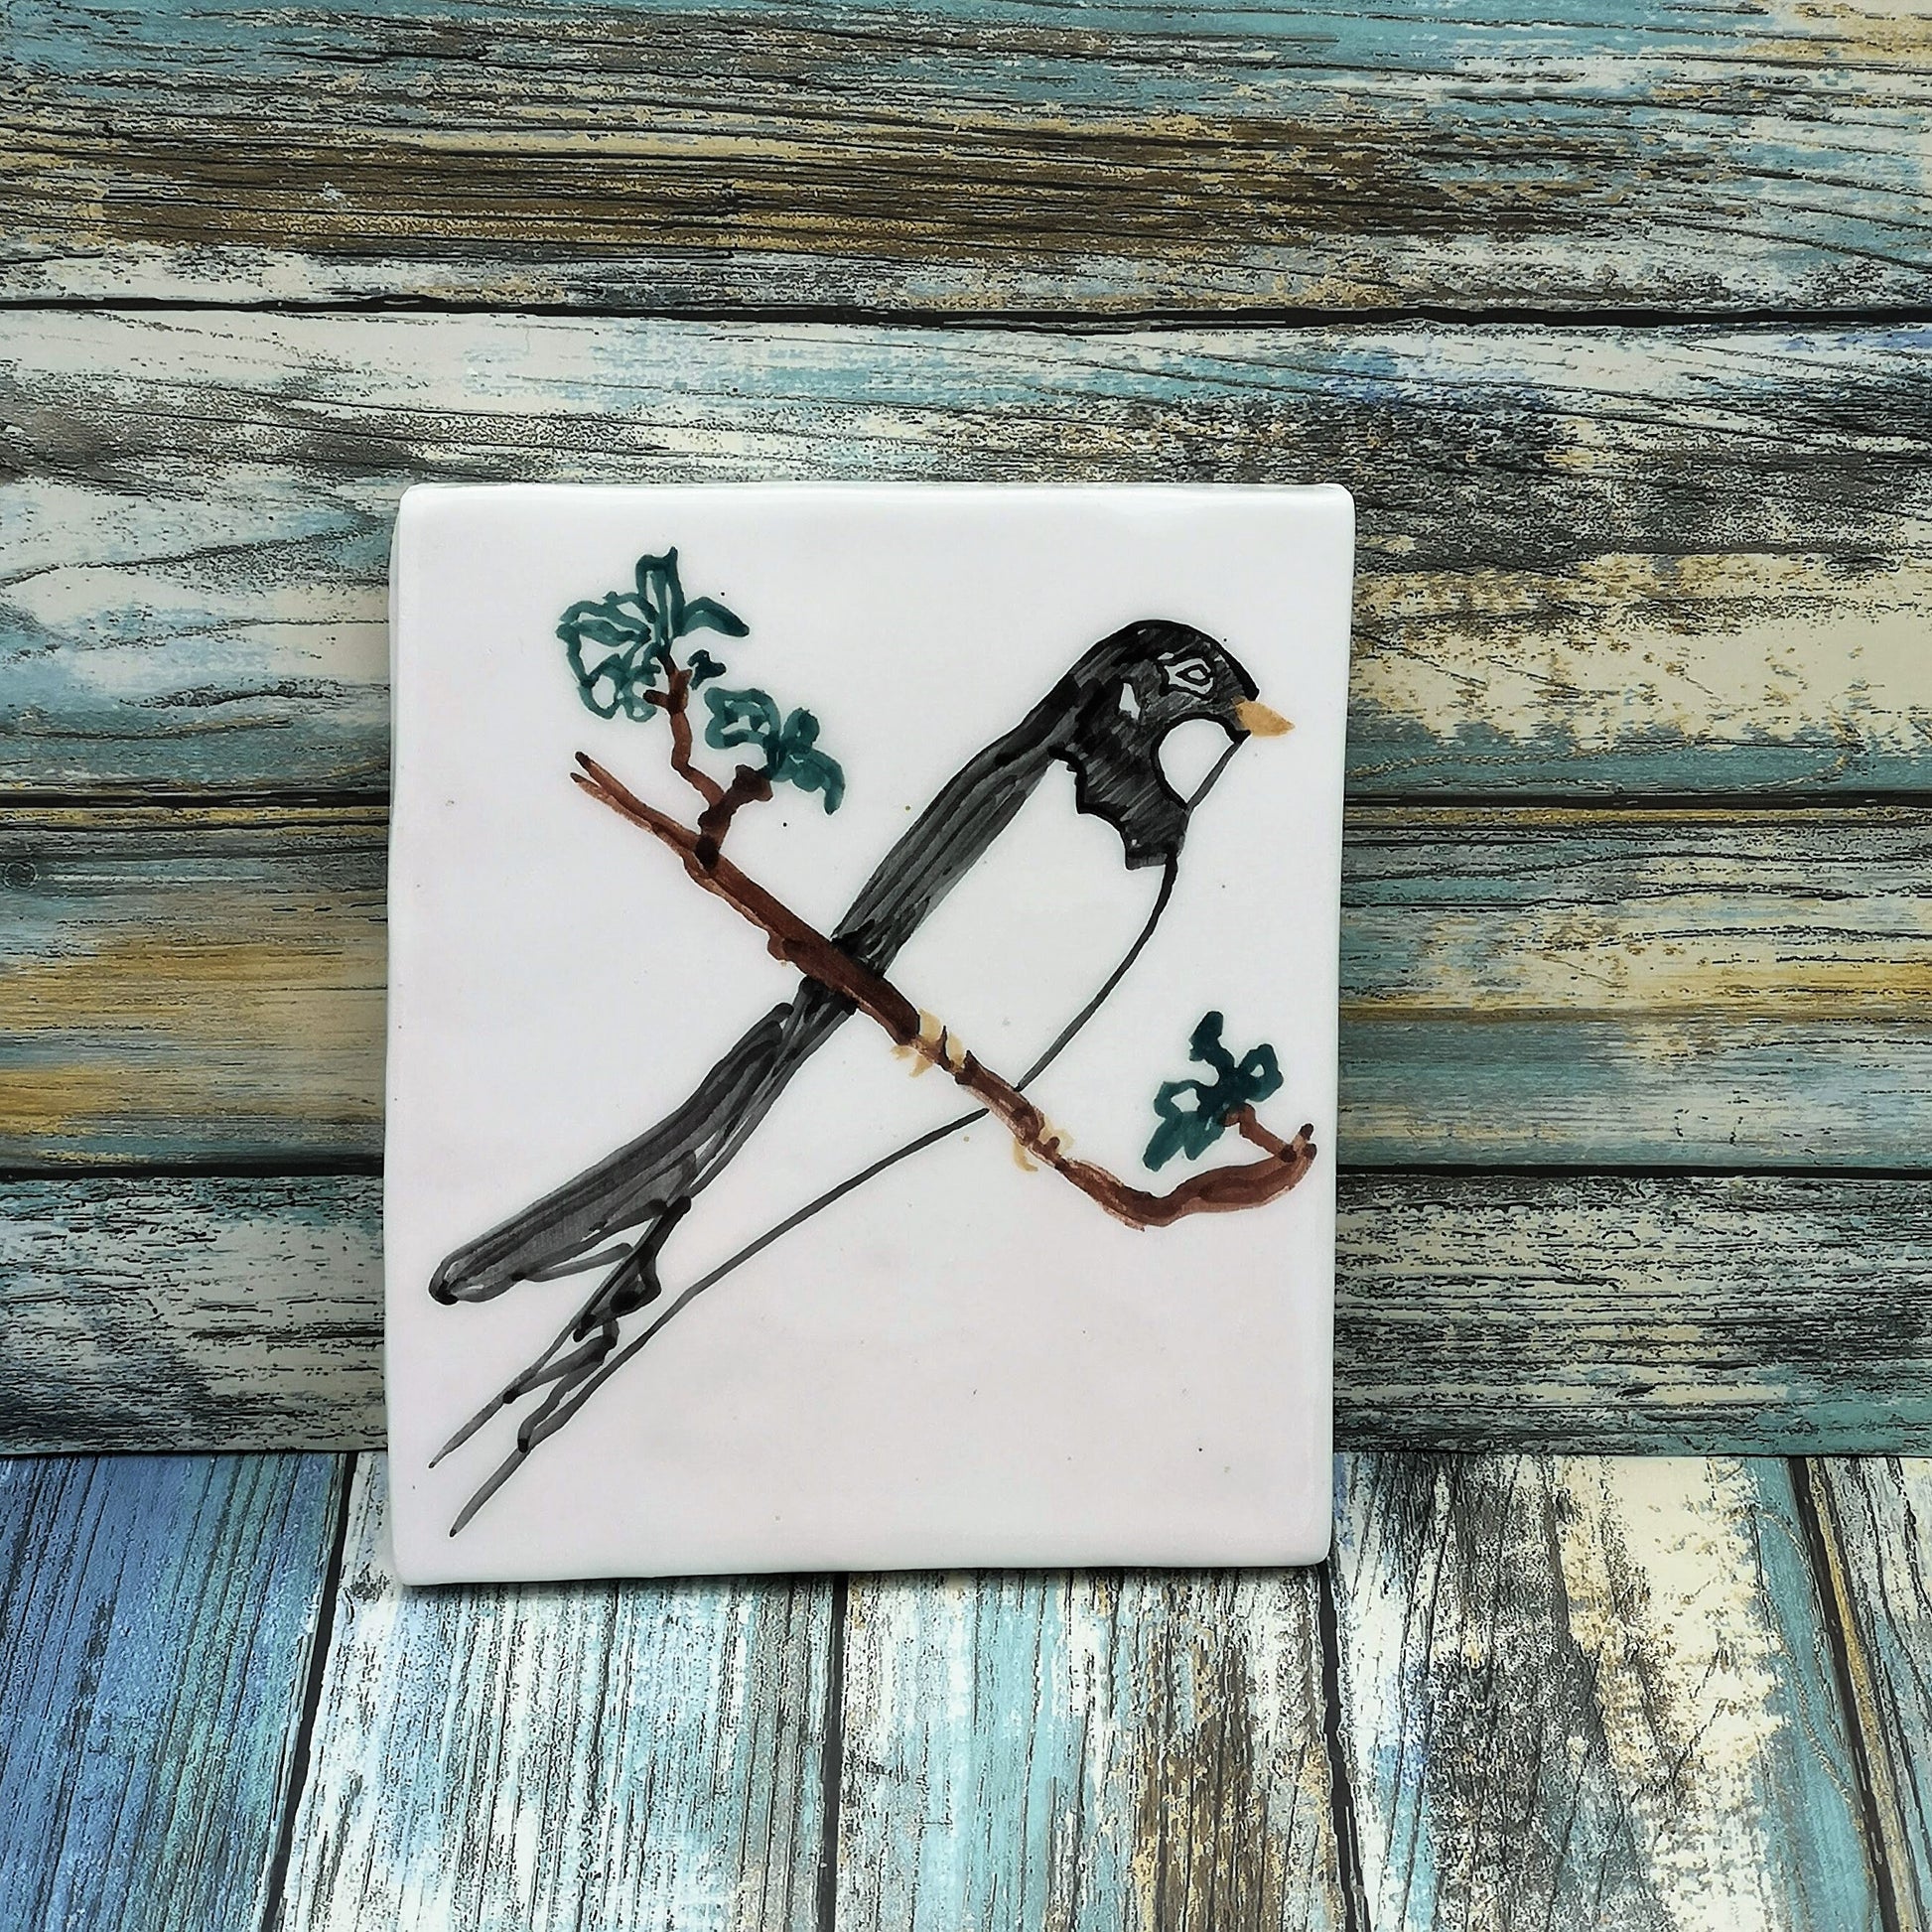 Hand Painted Swallow Bird Tiles For Backsplash, Bird Lovers Mother's Day Gift From Daughter, Handmade Ceramic Decorative Tiles Best Sellers - Ceramica Ana Rafael